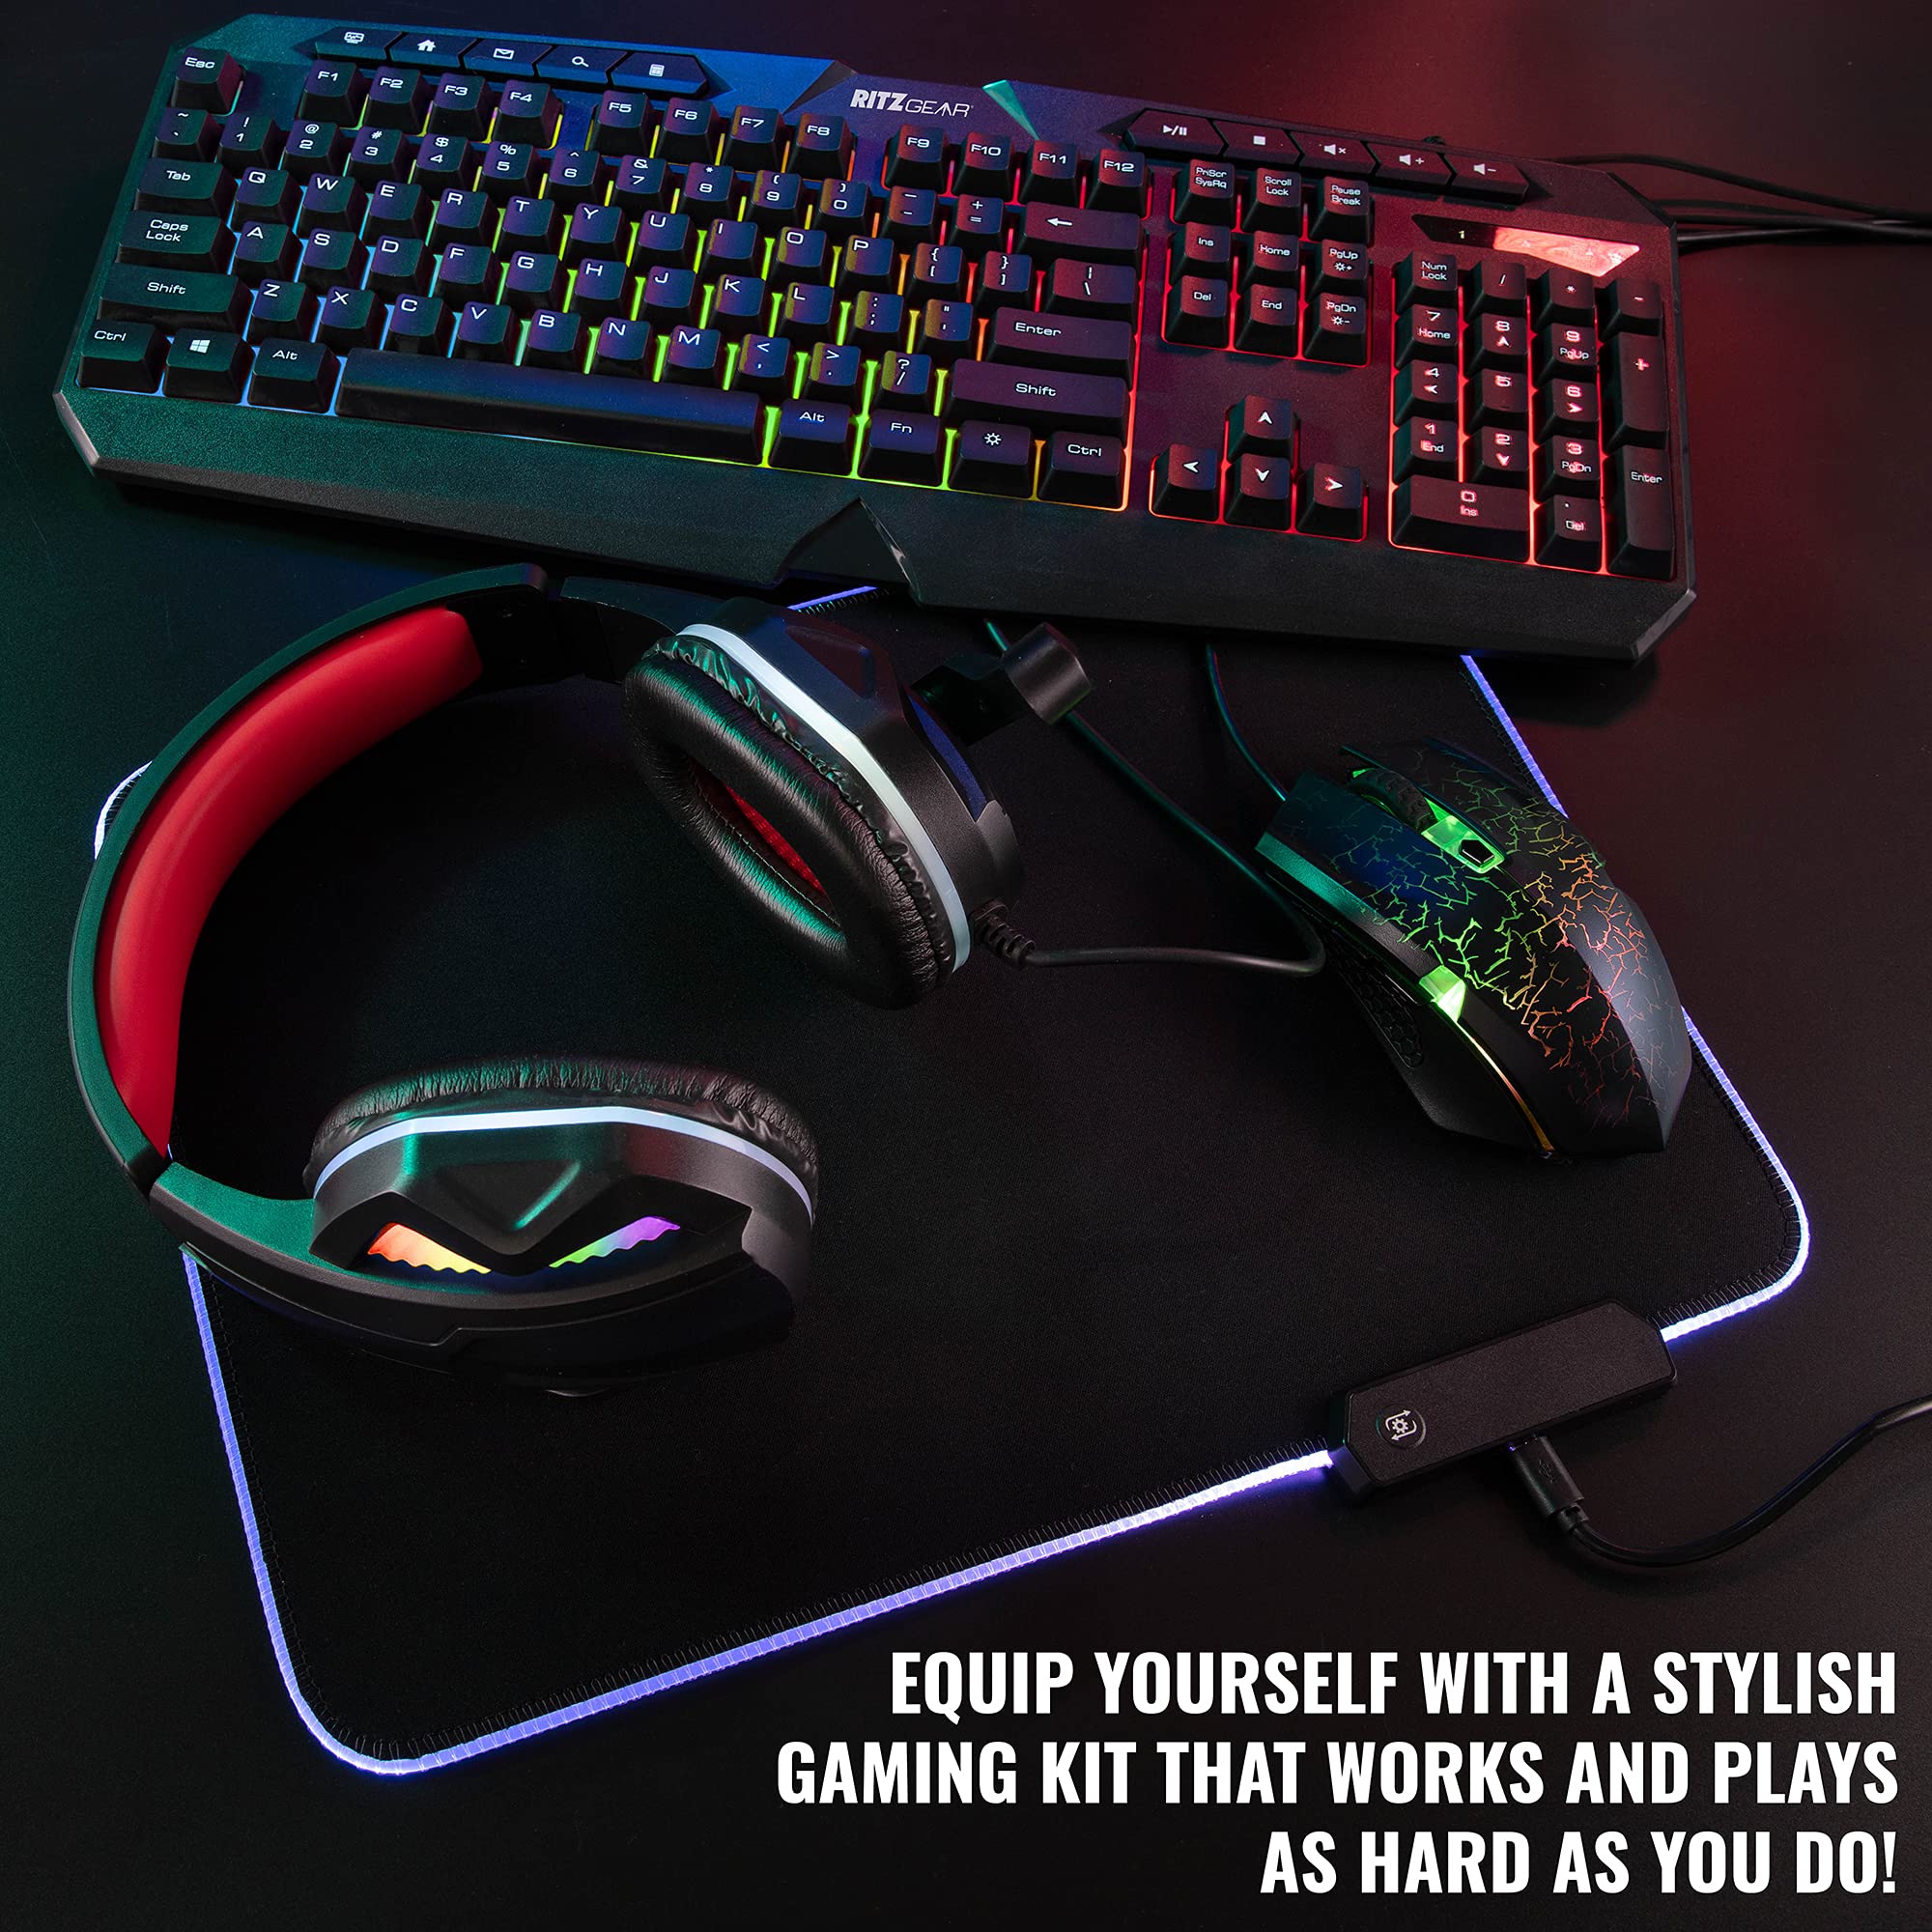 Ritz Gear RGB Gaming Accessories Kit | 4-in-1 Rainbow LED Backlight Bundle PC Combo with Multimedia Keyboard, Optical Mouse, Mouse Pad & Headset w/Adapter | for Windows 7+ Desktop, Laptop, Xbox & PS4